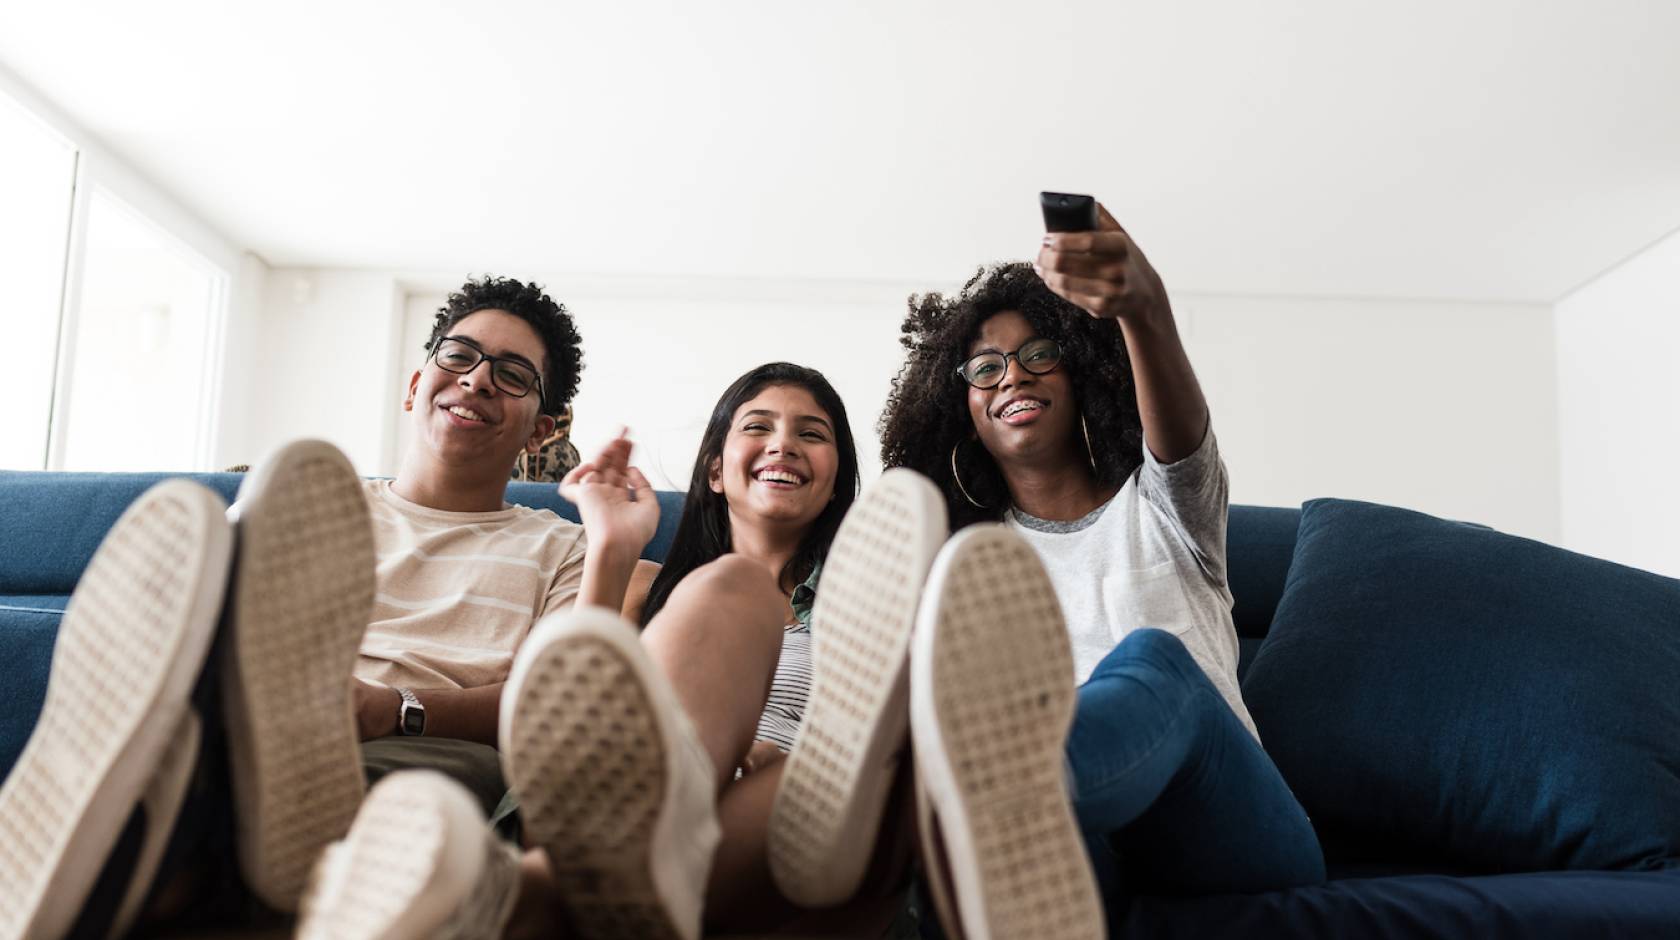 Three smiling teenagers sitting close together on a couch, one is holding a TV remote